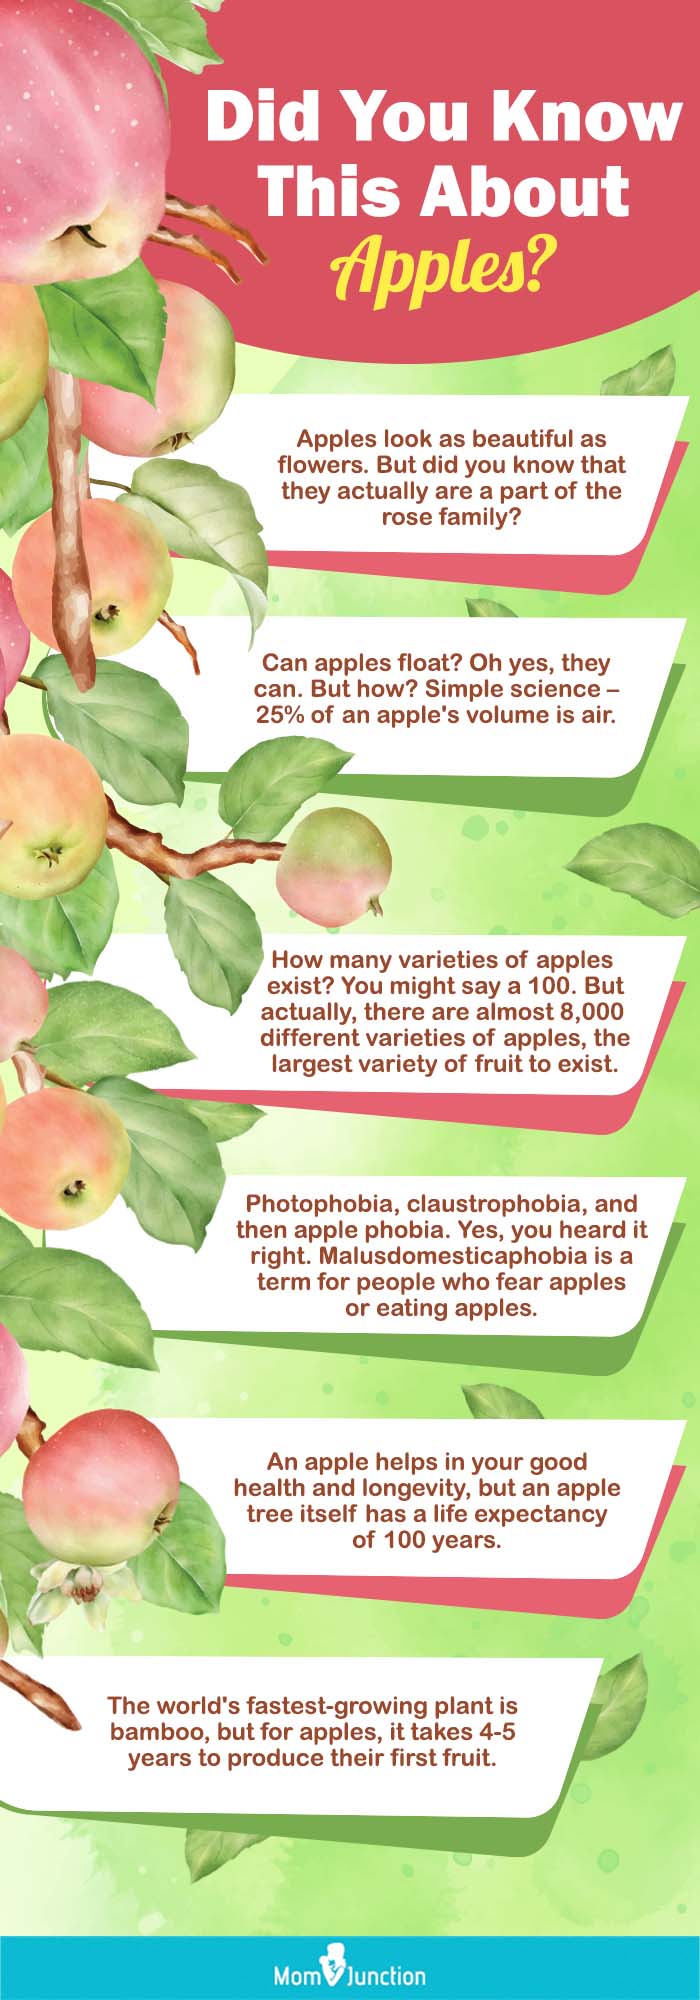 Early Fuji Apples Information and Facts